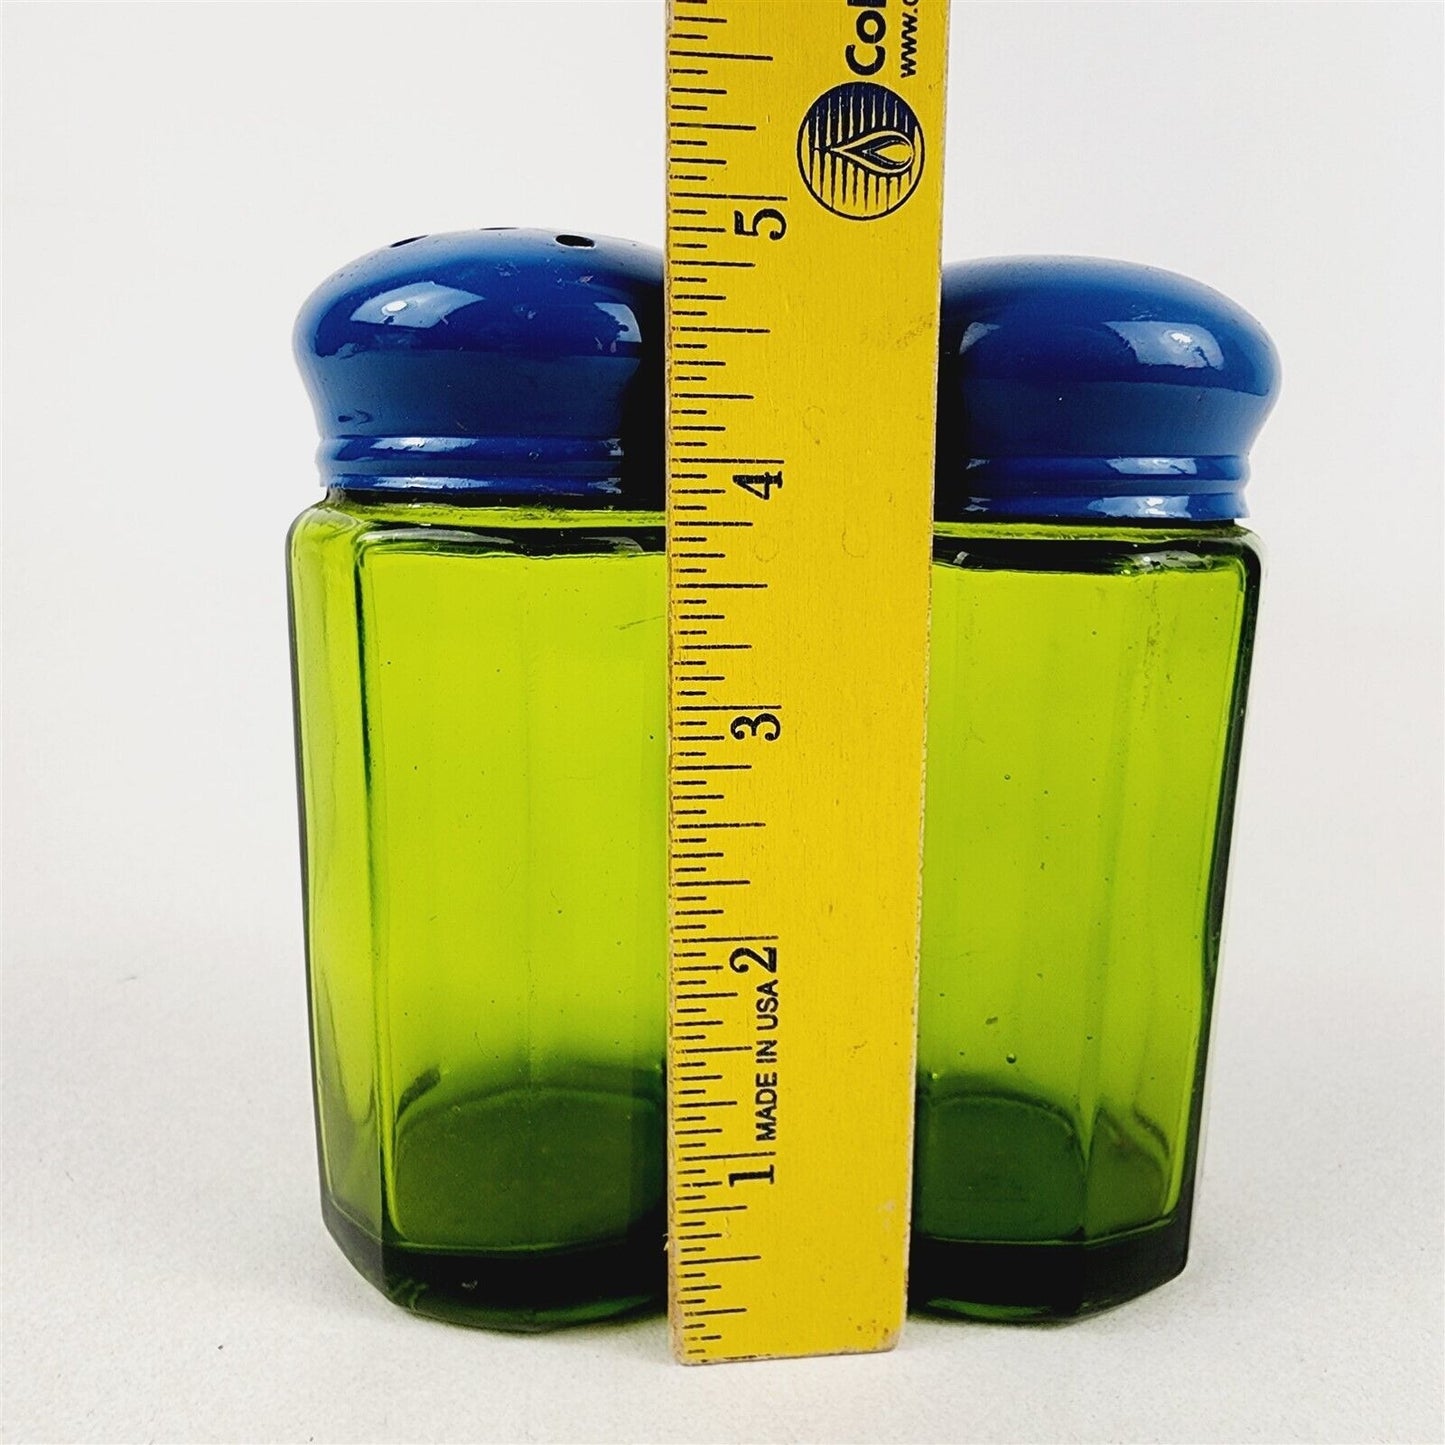 Vintage 1960s Shaker Set Green Glass Blue Metal Top Lid Made in Japan - 5" tall